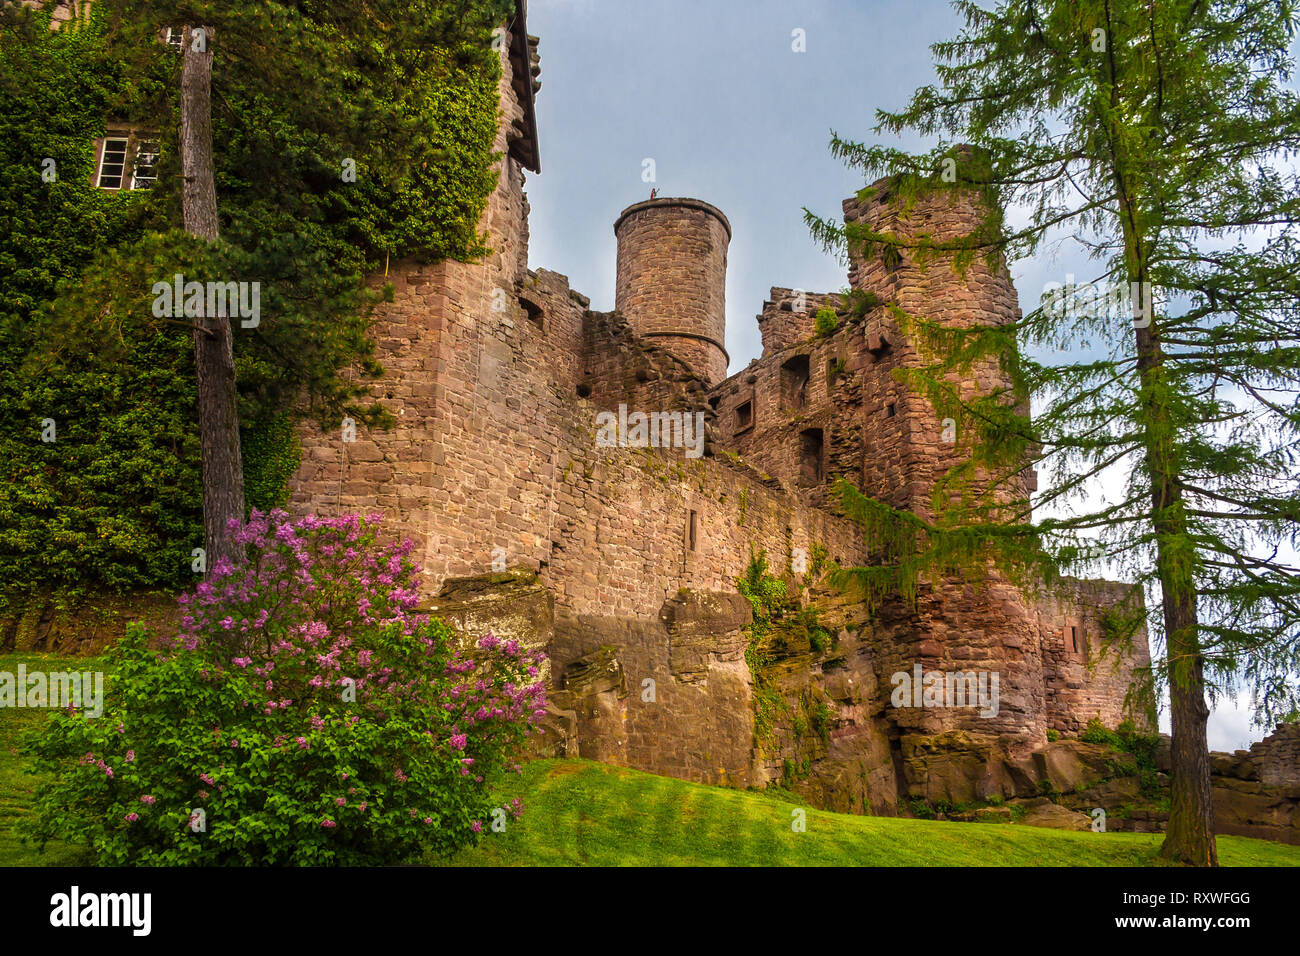 A very romantic view of the Hanstein Castle surrounded by flowers trees and a lawn. The ruined castle in Central Germany near Bornhagen in Thuringia... Stock Photo